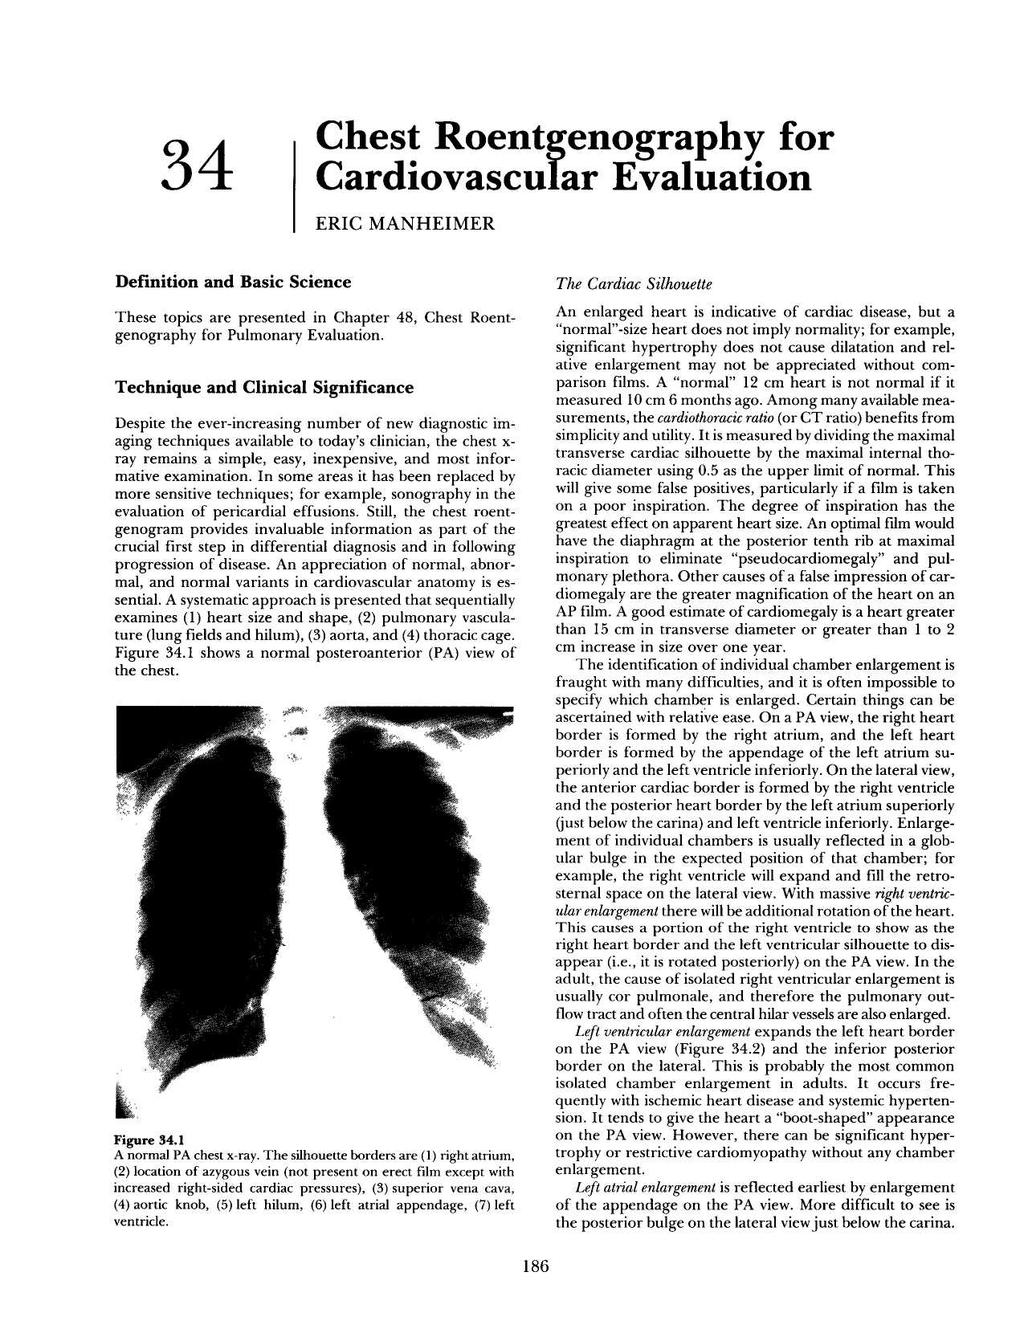 34 Chest Roentgenography for Cardiovascular Evaluation ERIC MANHEIMER Definition and Basic Science These topics are presented in Chapter 48, Chest Roentgenography for Pulmonary Evaluation.